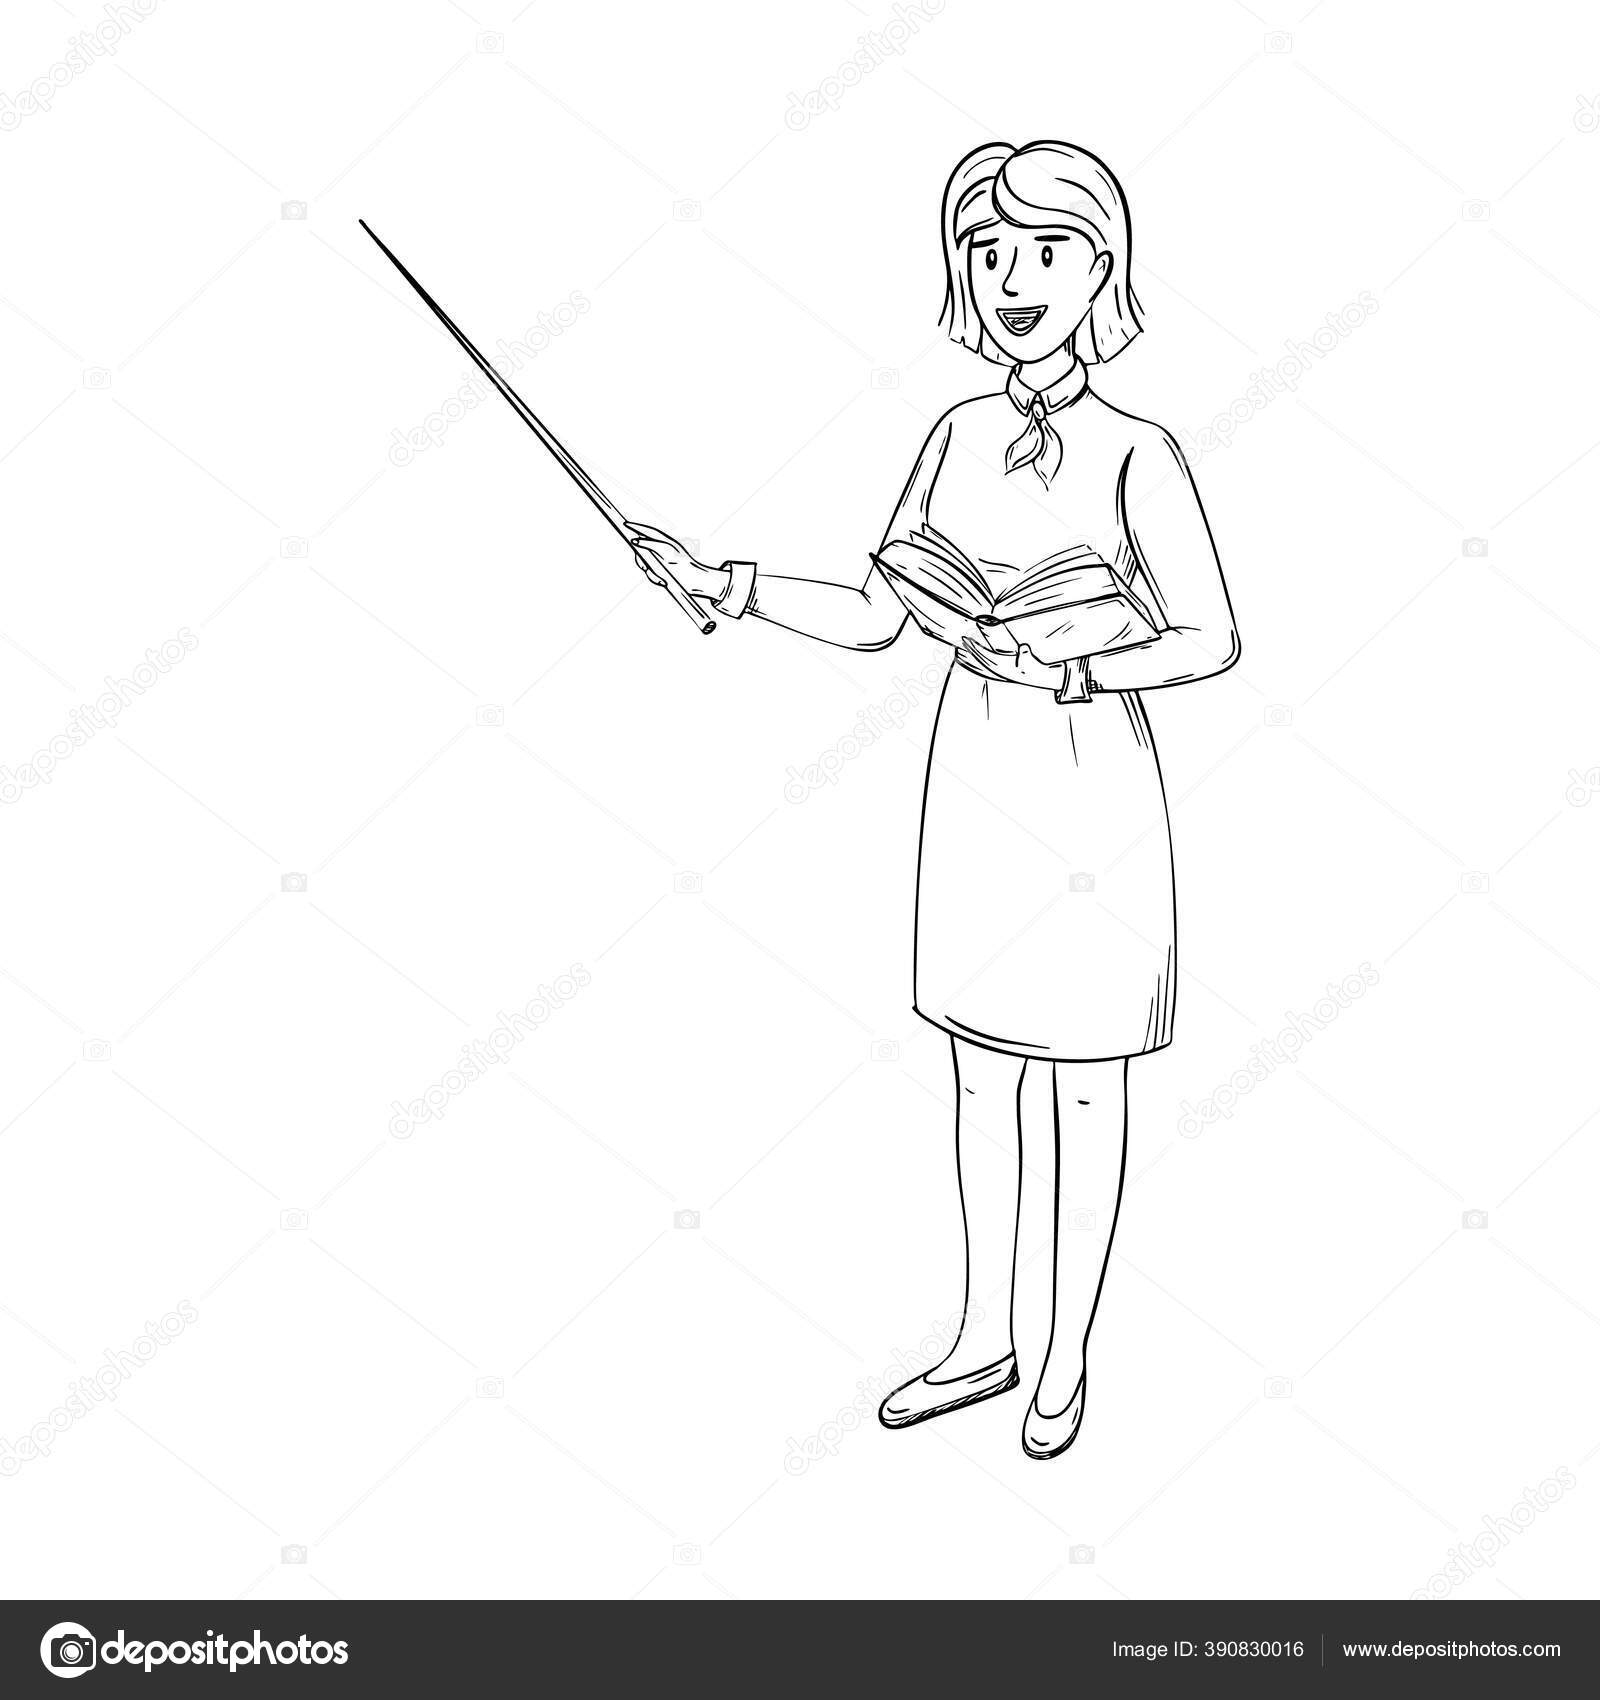 Sketch Of A Teacher In A Skirt And Blouse The Woman Stands With A Pointer In One Hand And An Open Book In The Other A Pretty Teacher With Short Dark Hair